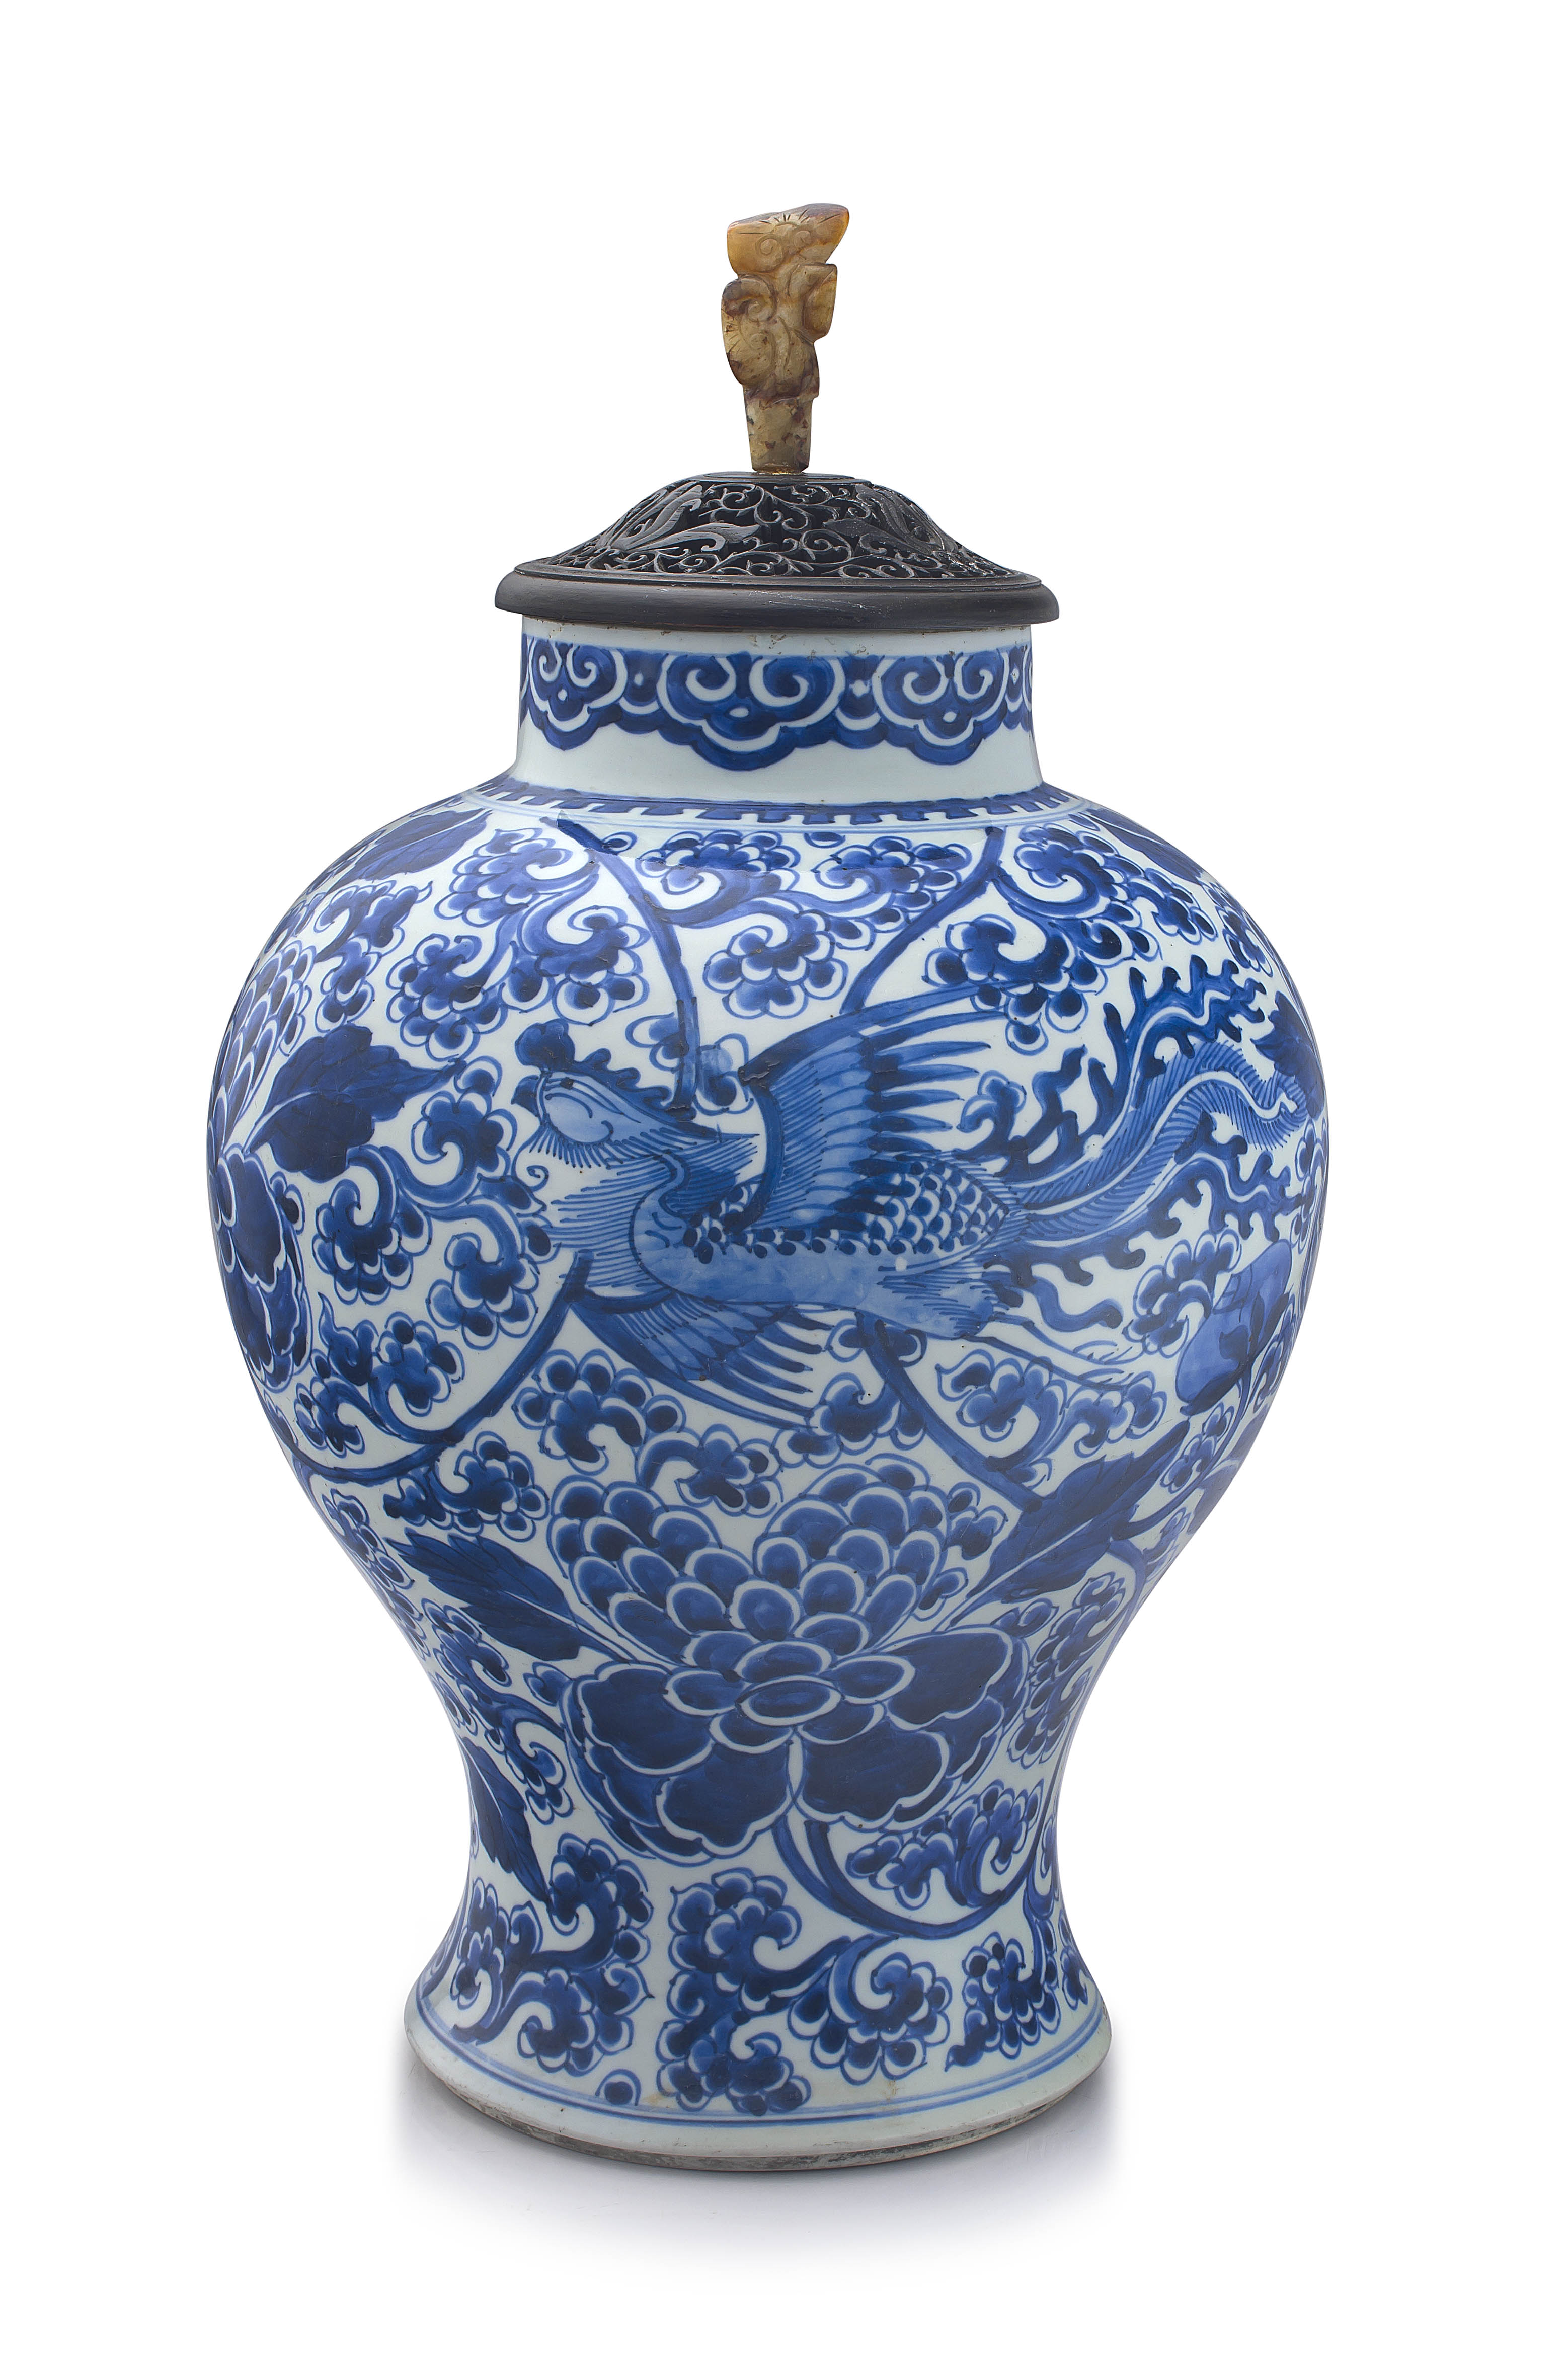 A Chinese blue and white vase, Qing Dynasty, Kangxi period, 1662-1722